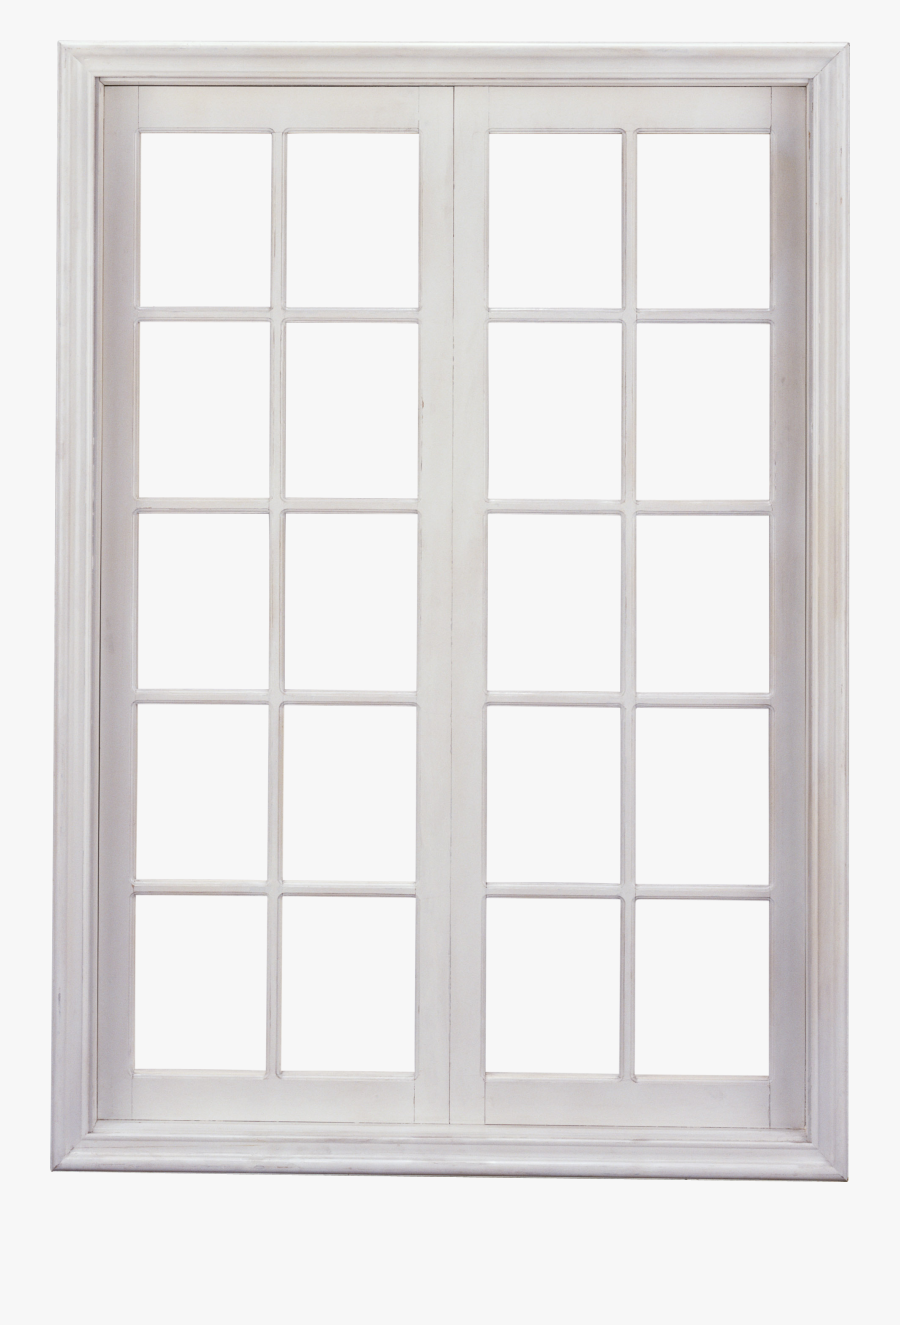 Download And Use Window High Quality Png - Window Png, Transparent Clipart